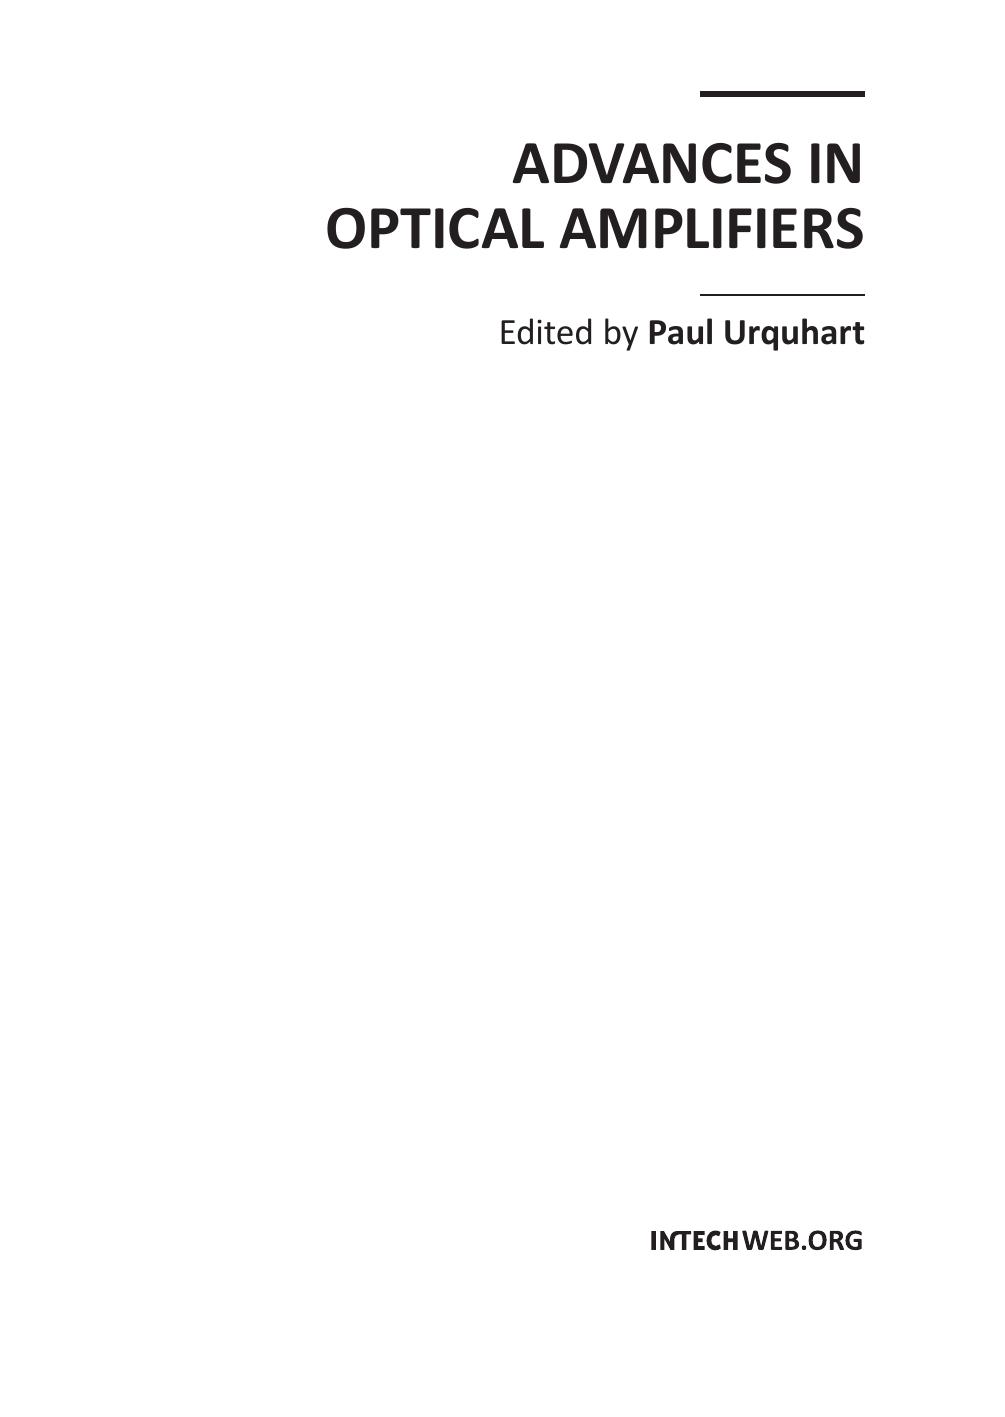 Advances in Optical Amplifiers.indd